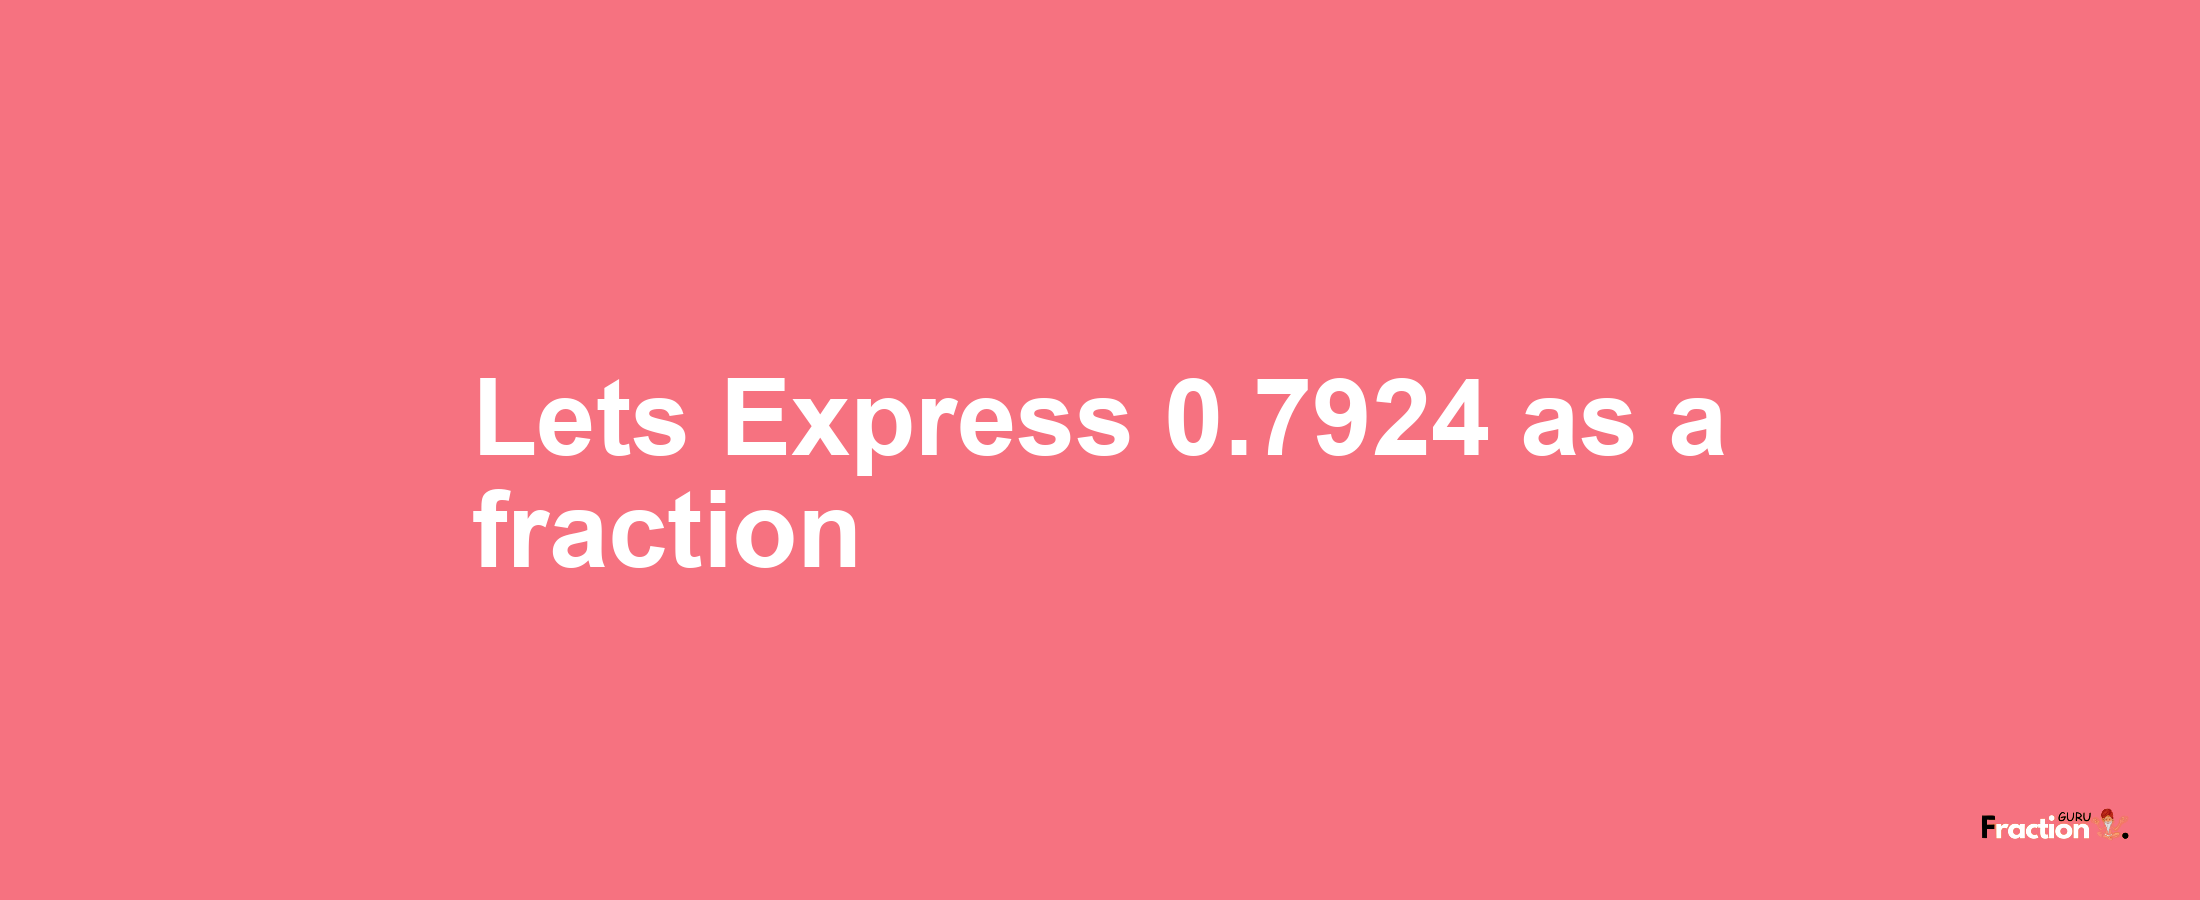 Lets Express 0.7924 as afraction